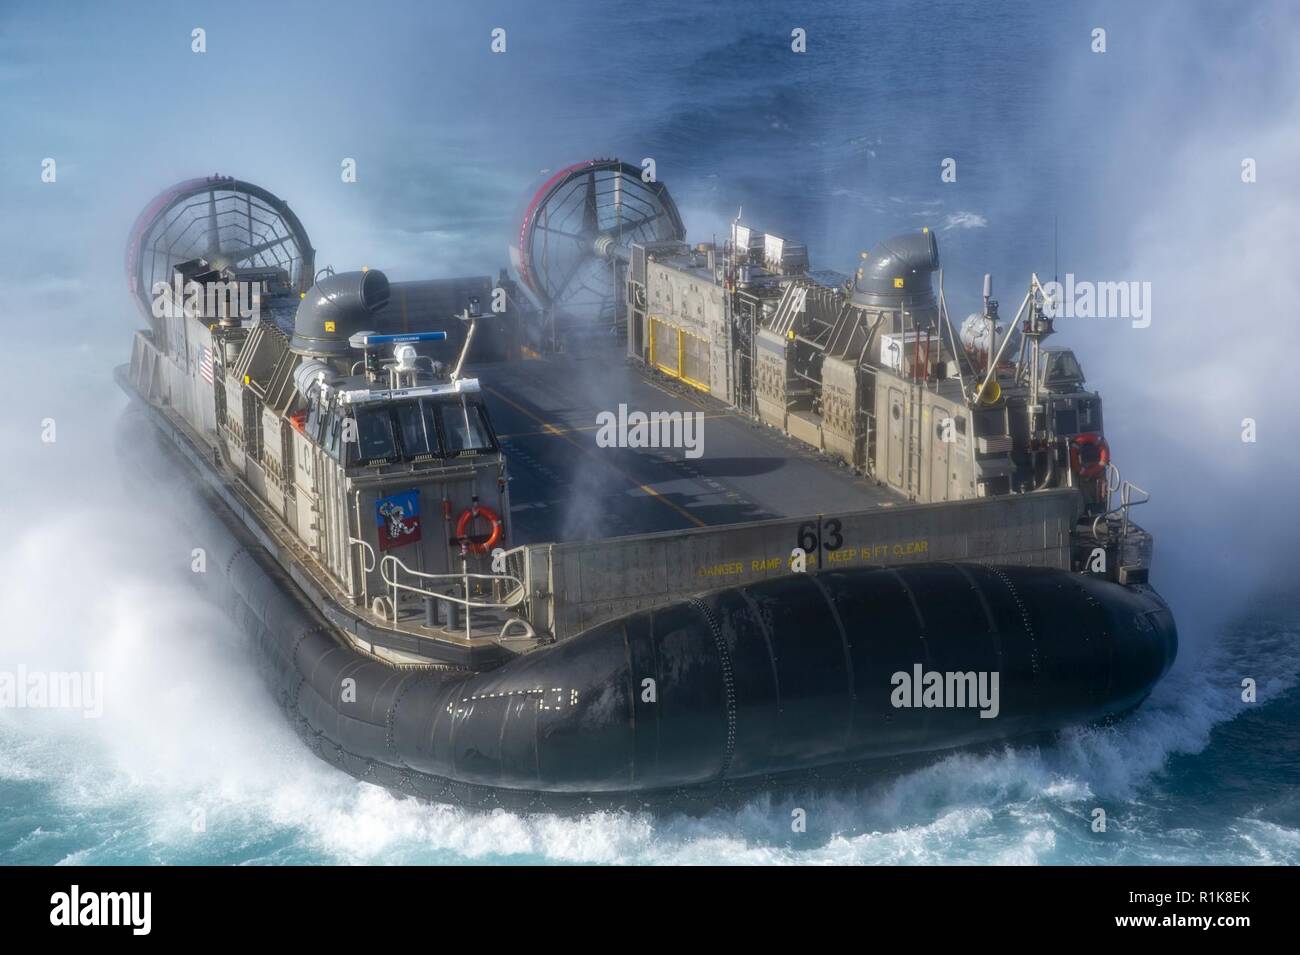 PACIFIC OCEAN (Oct. 10, 2018) Landing craft air cushion (LCAC) 63, assigned to Assault Craft Unit (ACU) 5, approaches the well deck of the amphibious assault ship USS Bonhomme Richard (LHD 6). Bonhomme Richard is operating in the U.S. 3rd Fleet area of operations. Stock Photo